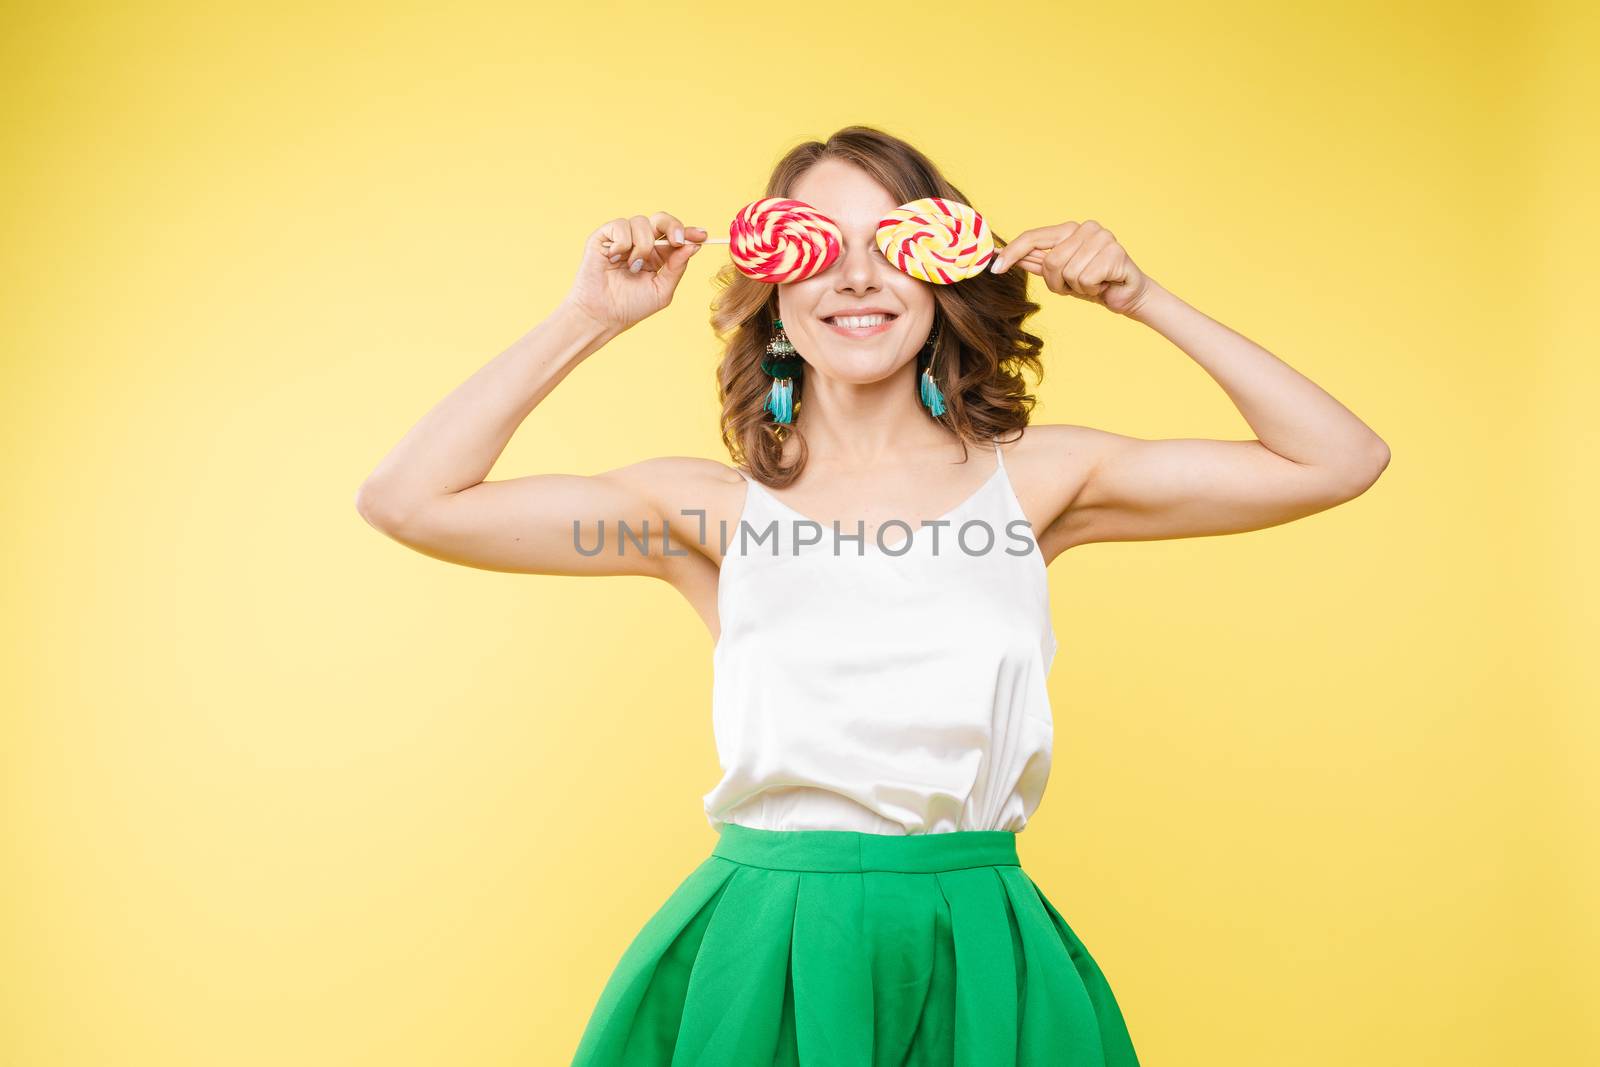 Full length studio portrait of laughing model in white top and green skirt and heels holding two sweet candies on her eyes like sunglasses with her mouth open. Isolate on yellow.